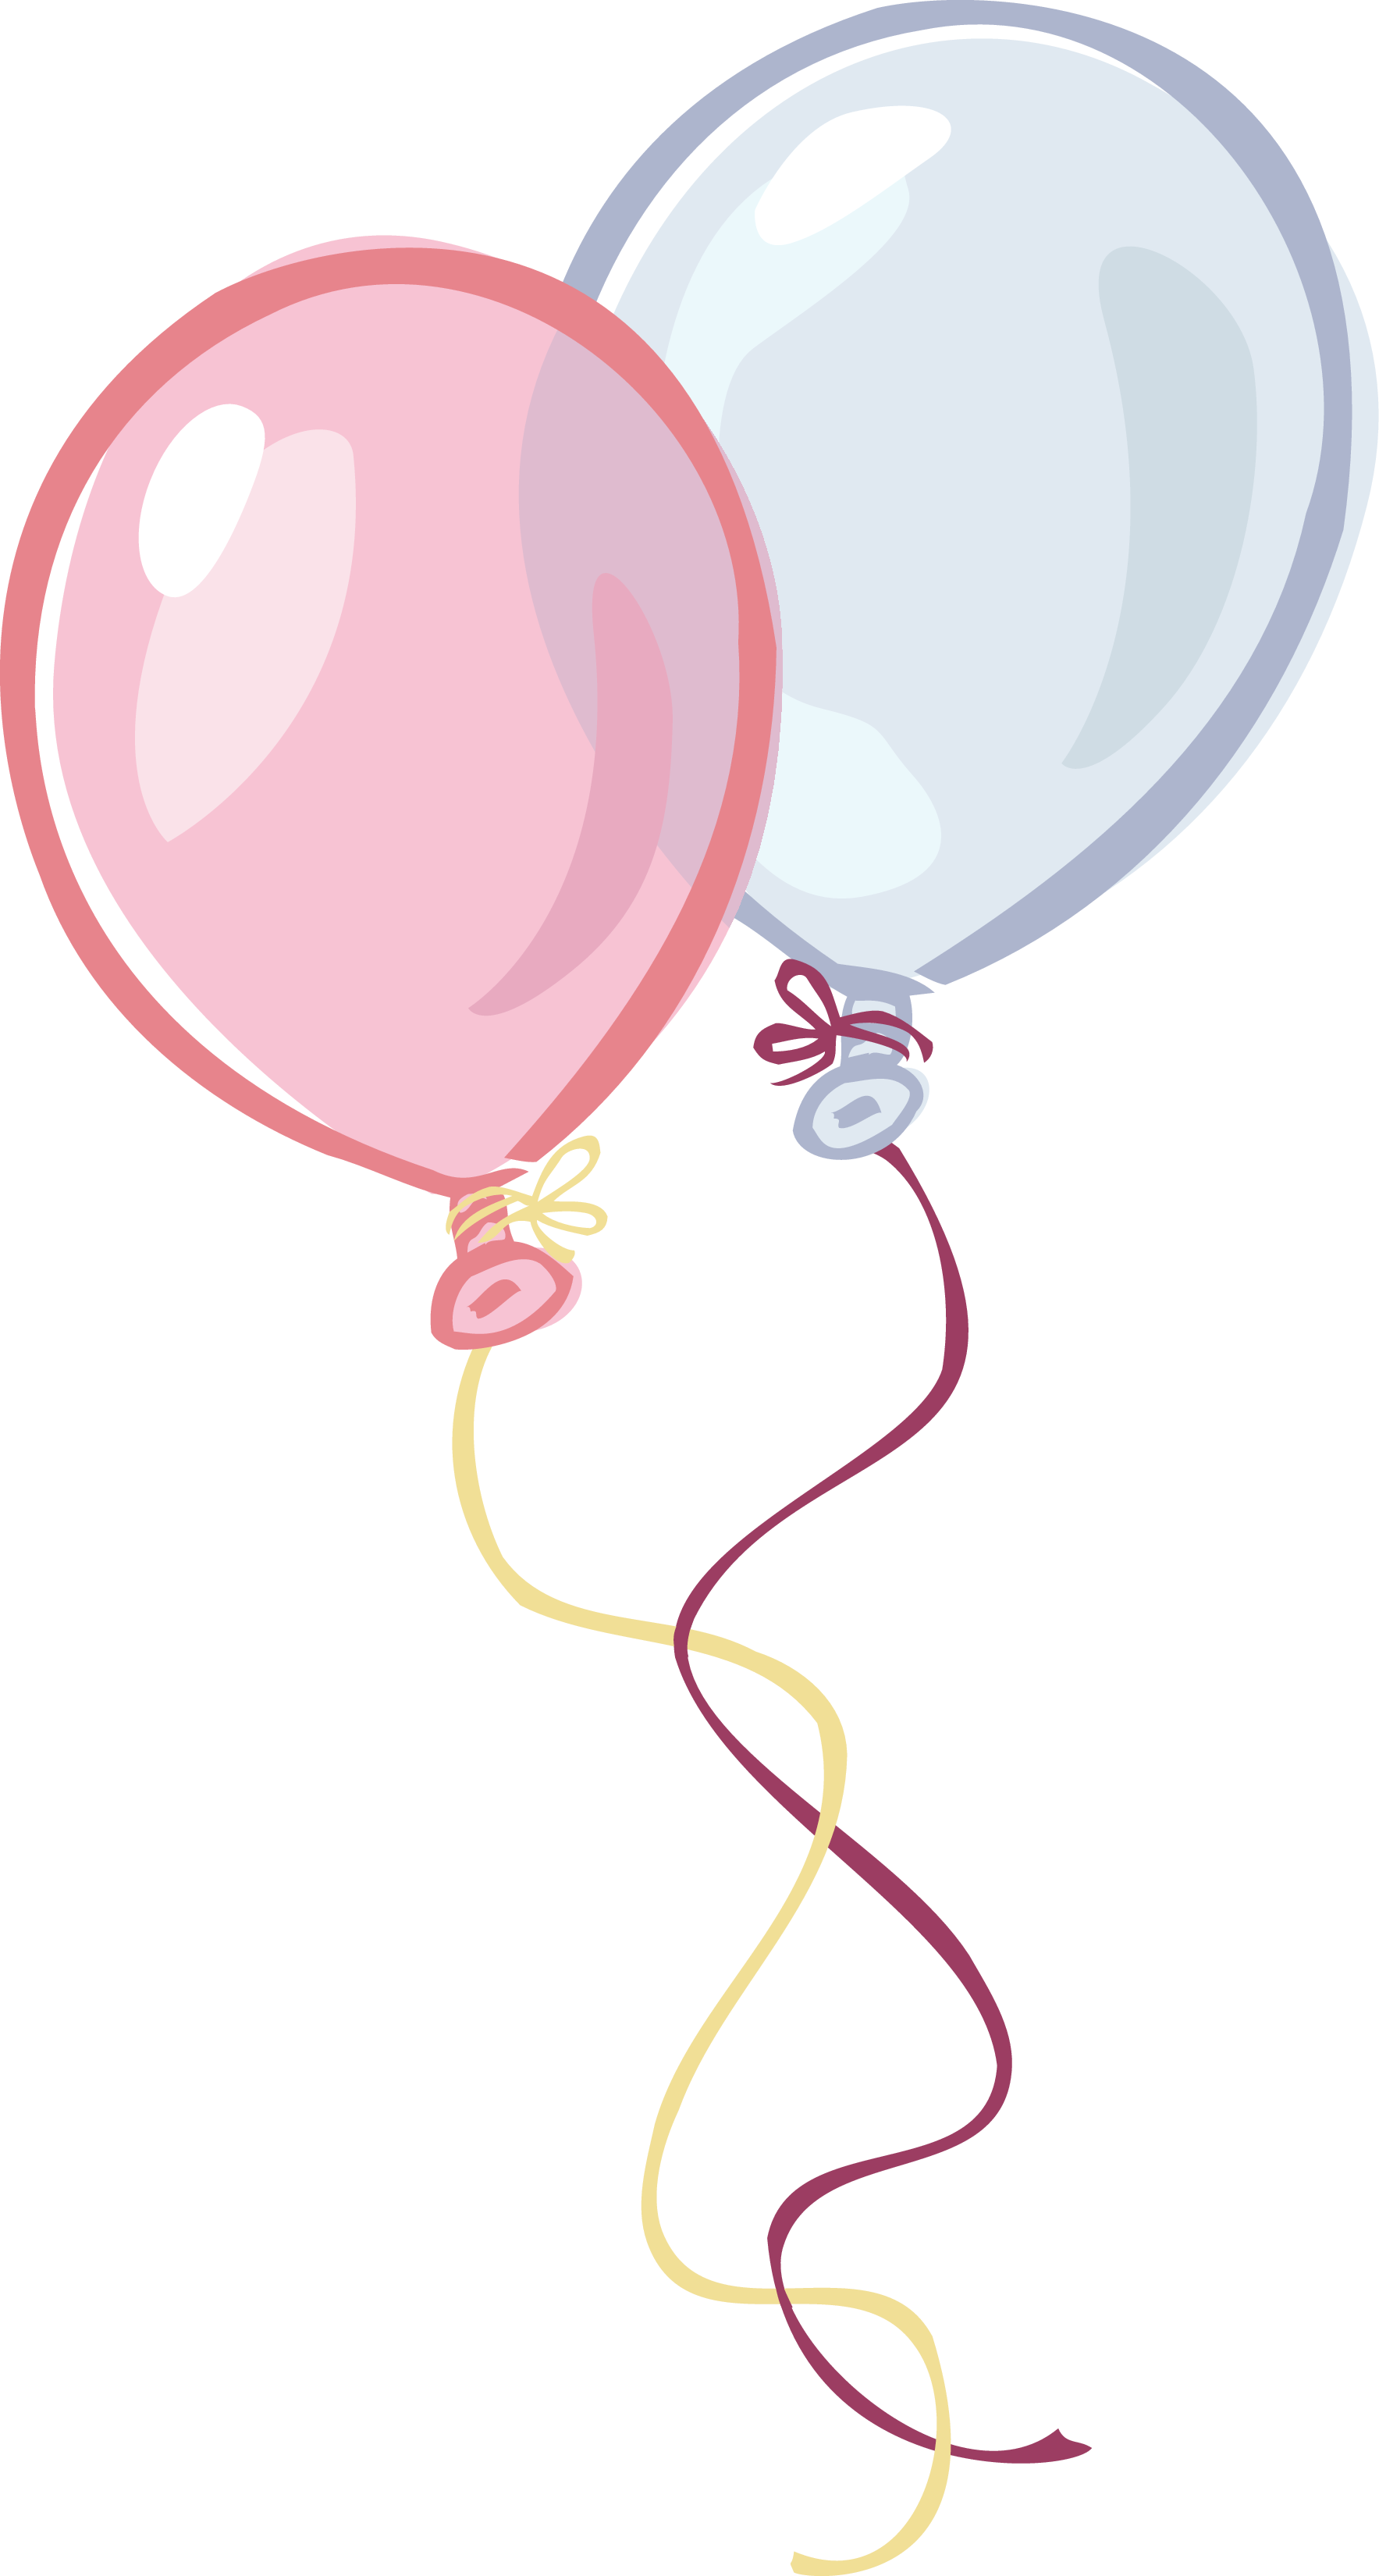 Balloon Birthday Party Clip art - Birthday Balloons Png png download